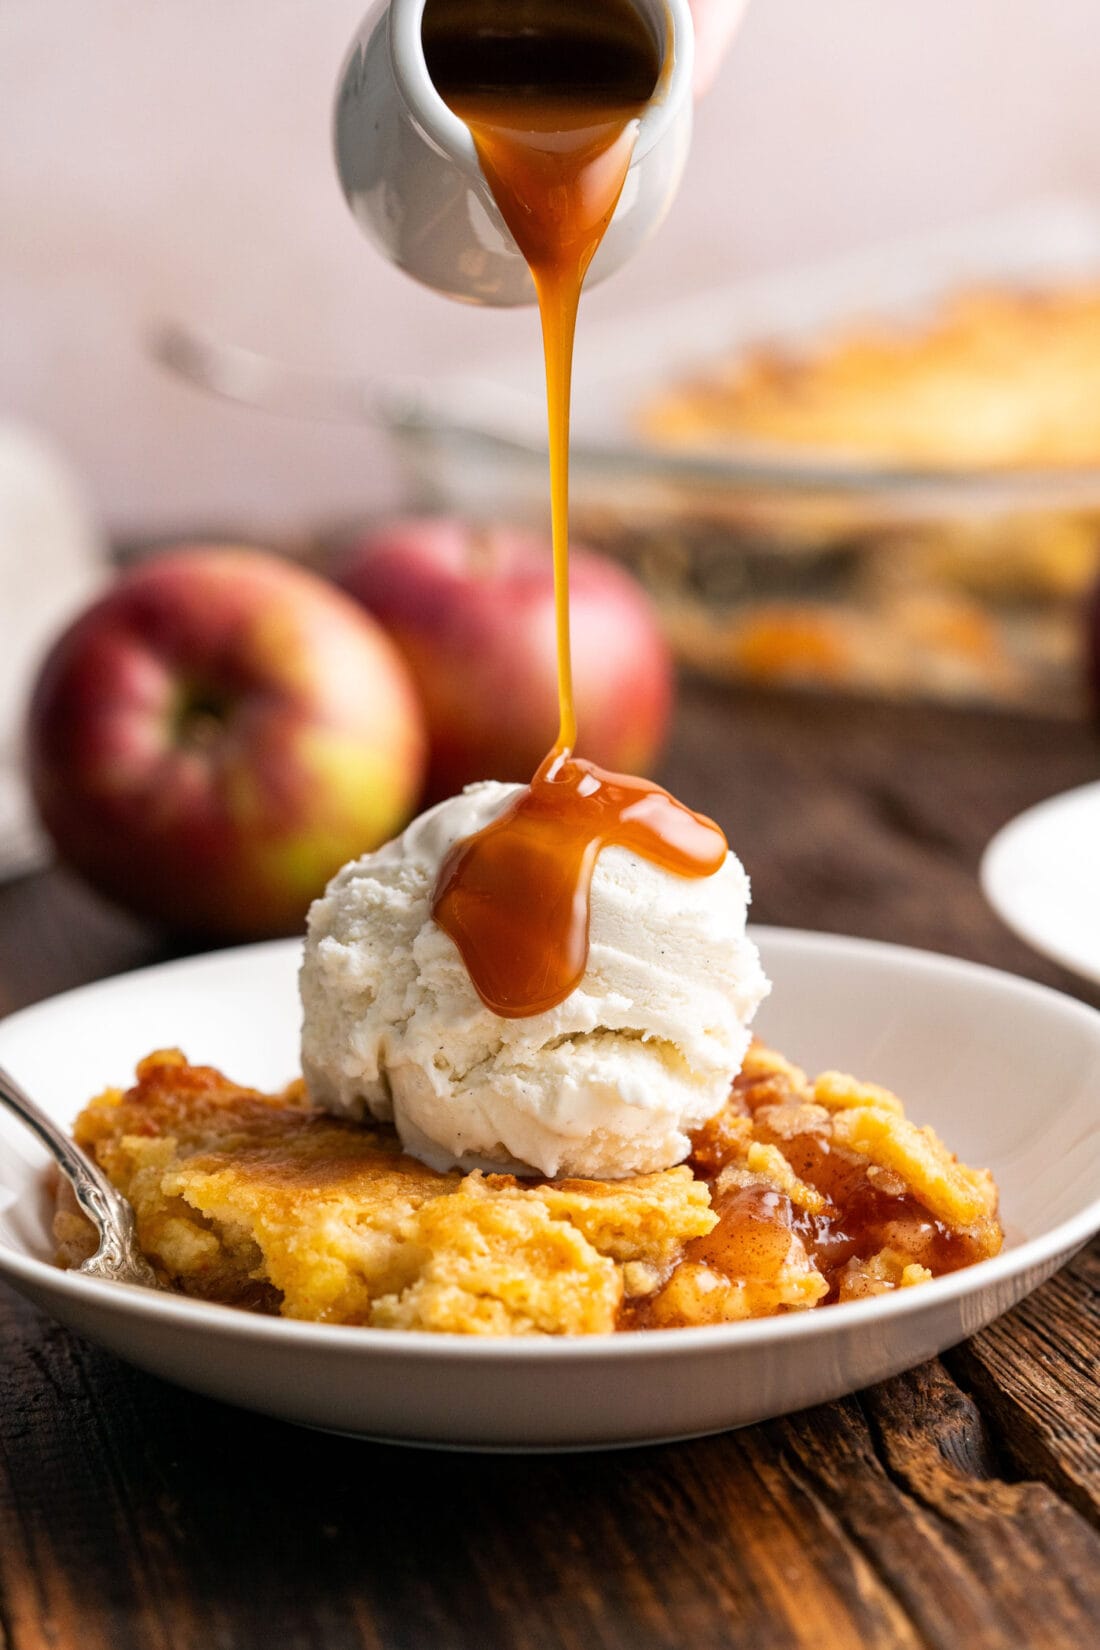 Caramel sauce being drizzled over Caramel Apple Dump Cake topped with ice cream